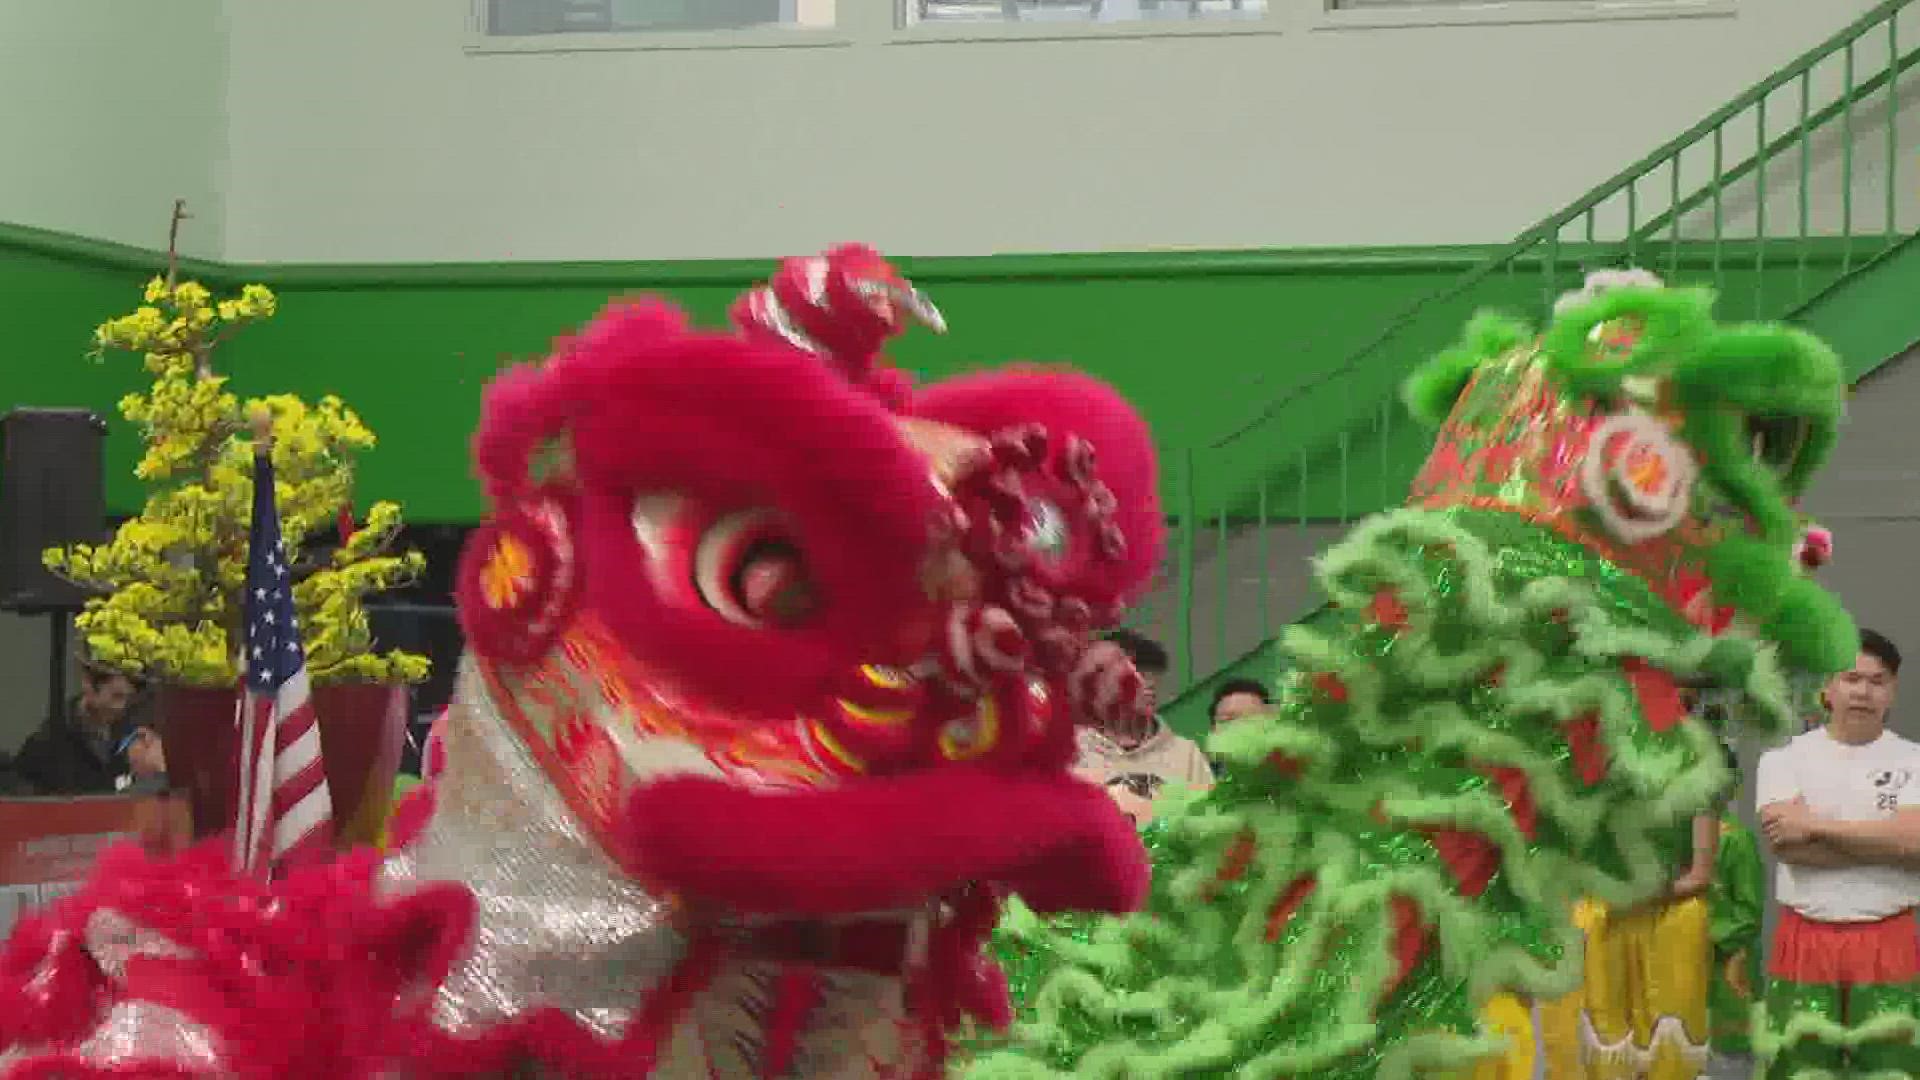 Lunar New Year festivities kicked off early in St. Louis this weekend. The event at St. Mary's High School included games, food and a traditional lion dance.